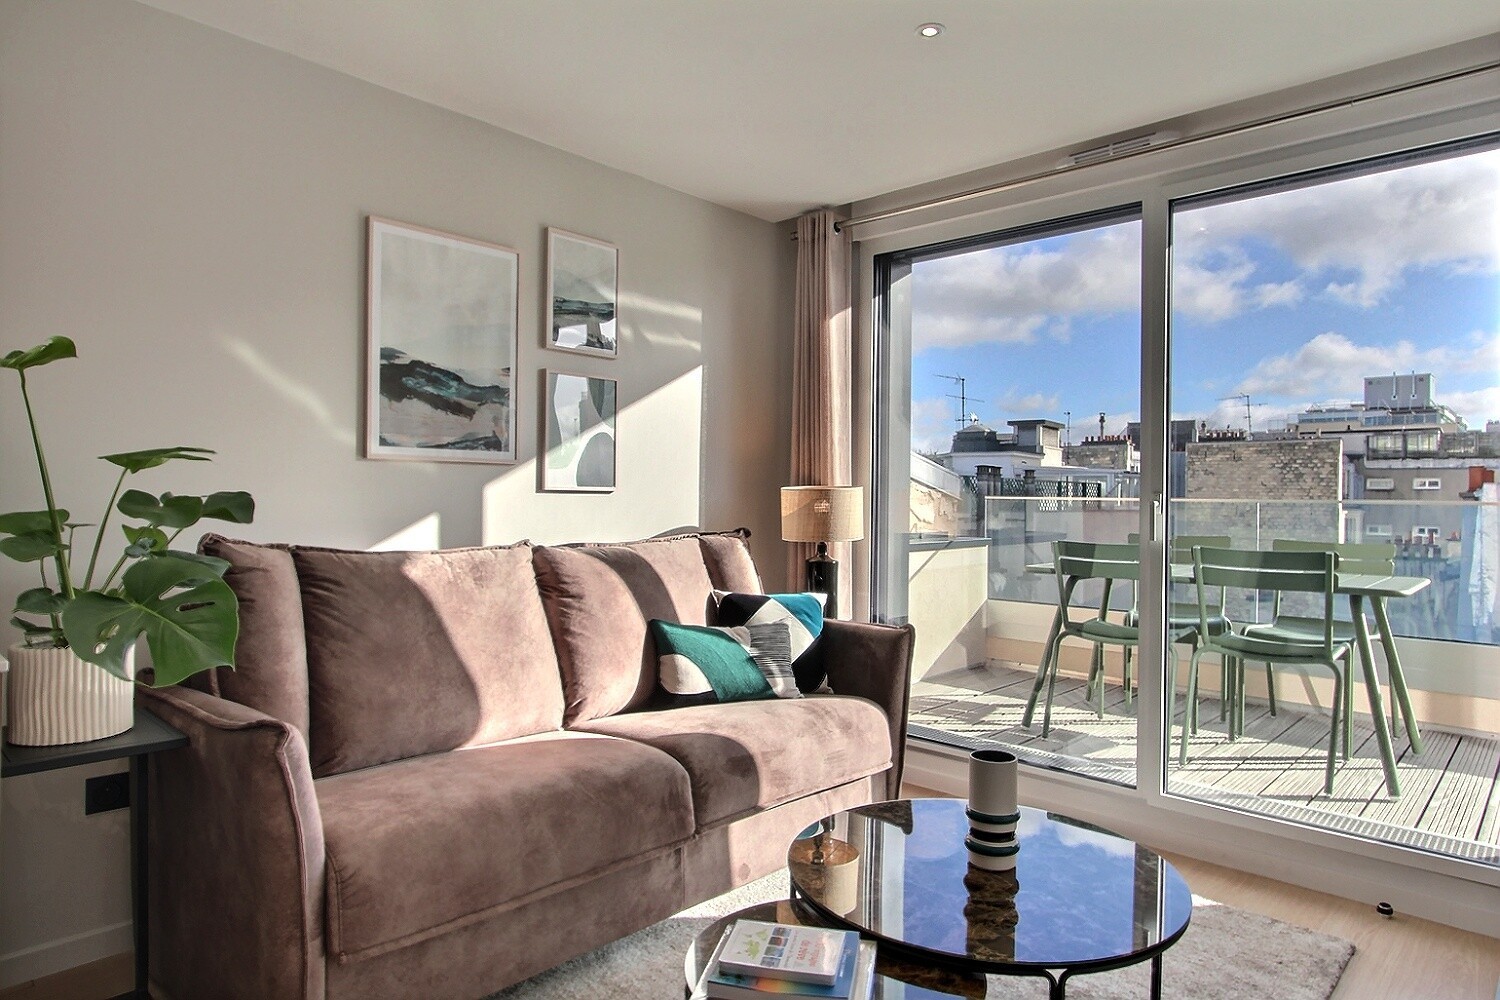 Air-conditioned 1-bedroom apartment with balcony just a few minutes from the Eiffel Tower